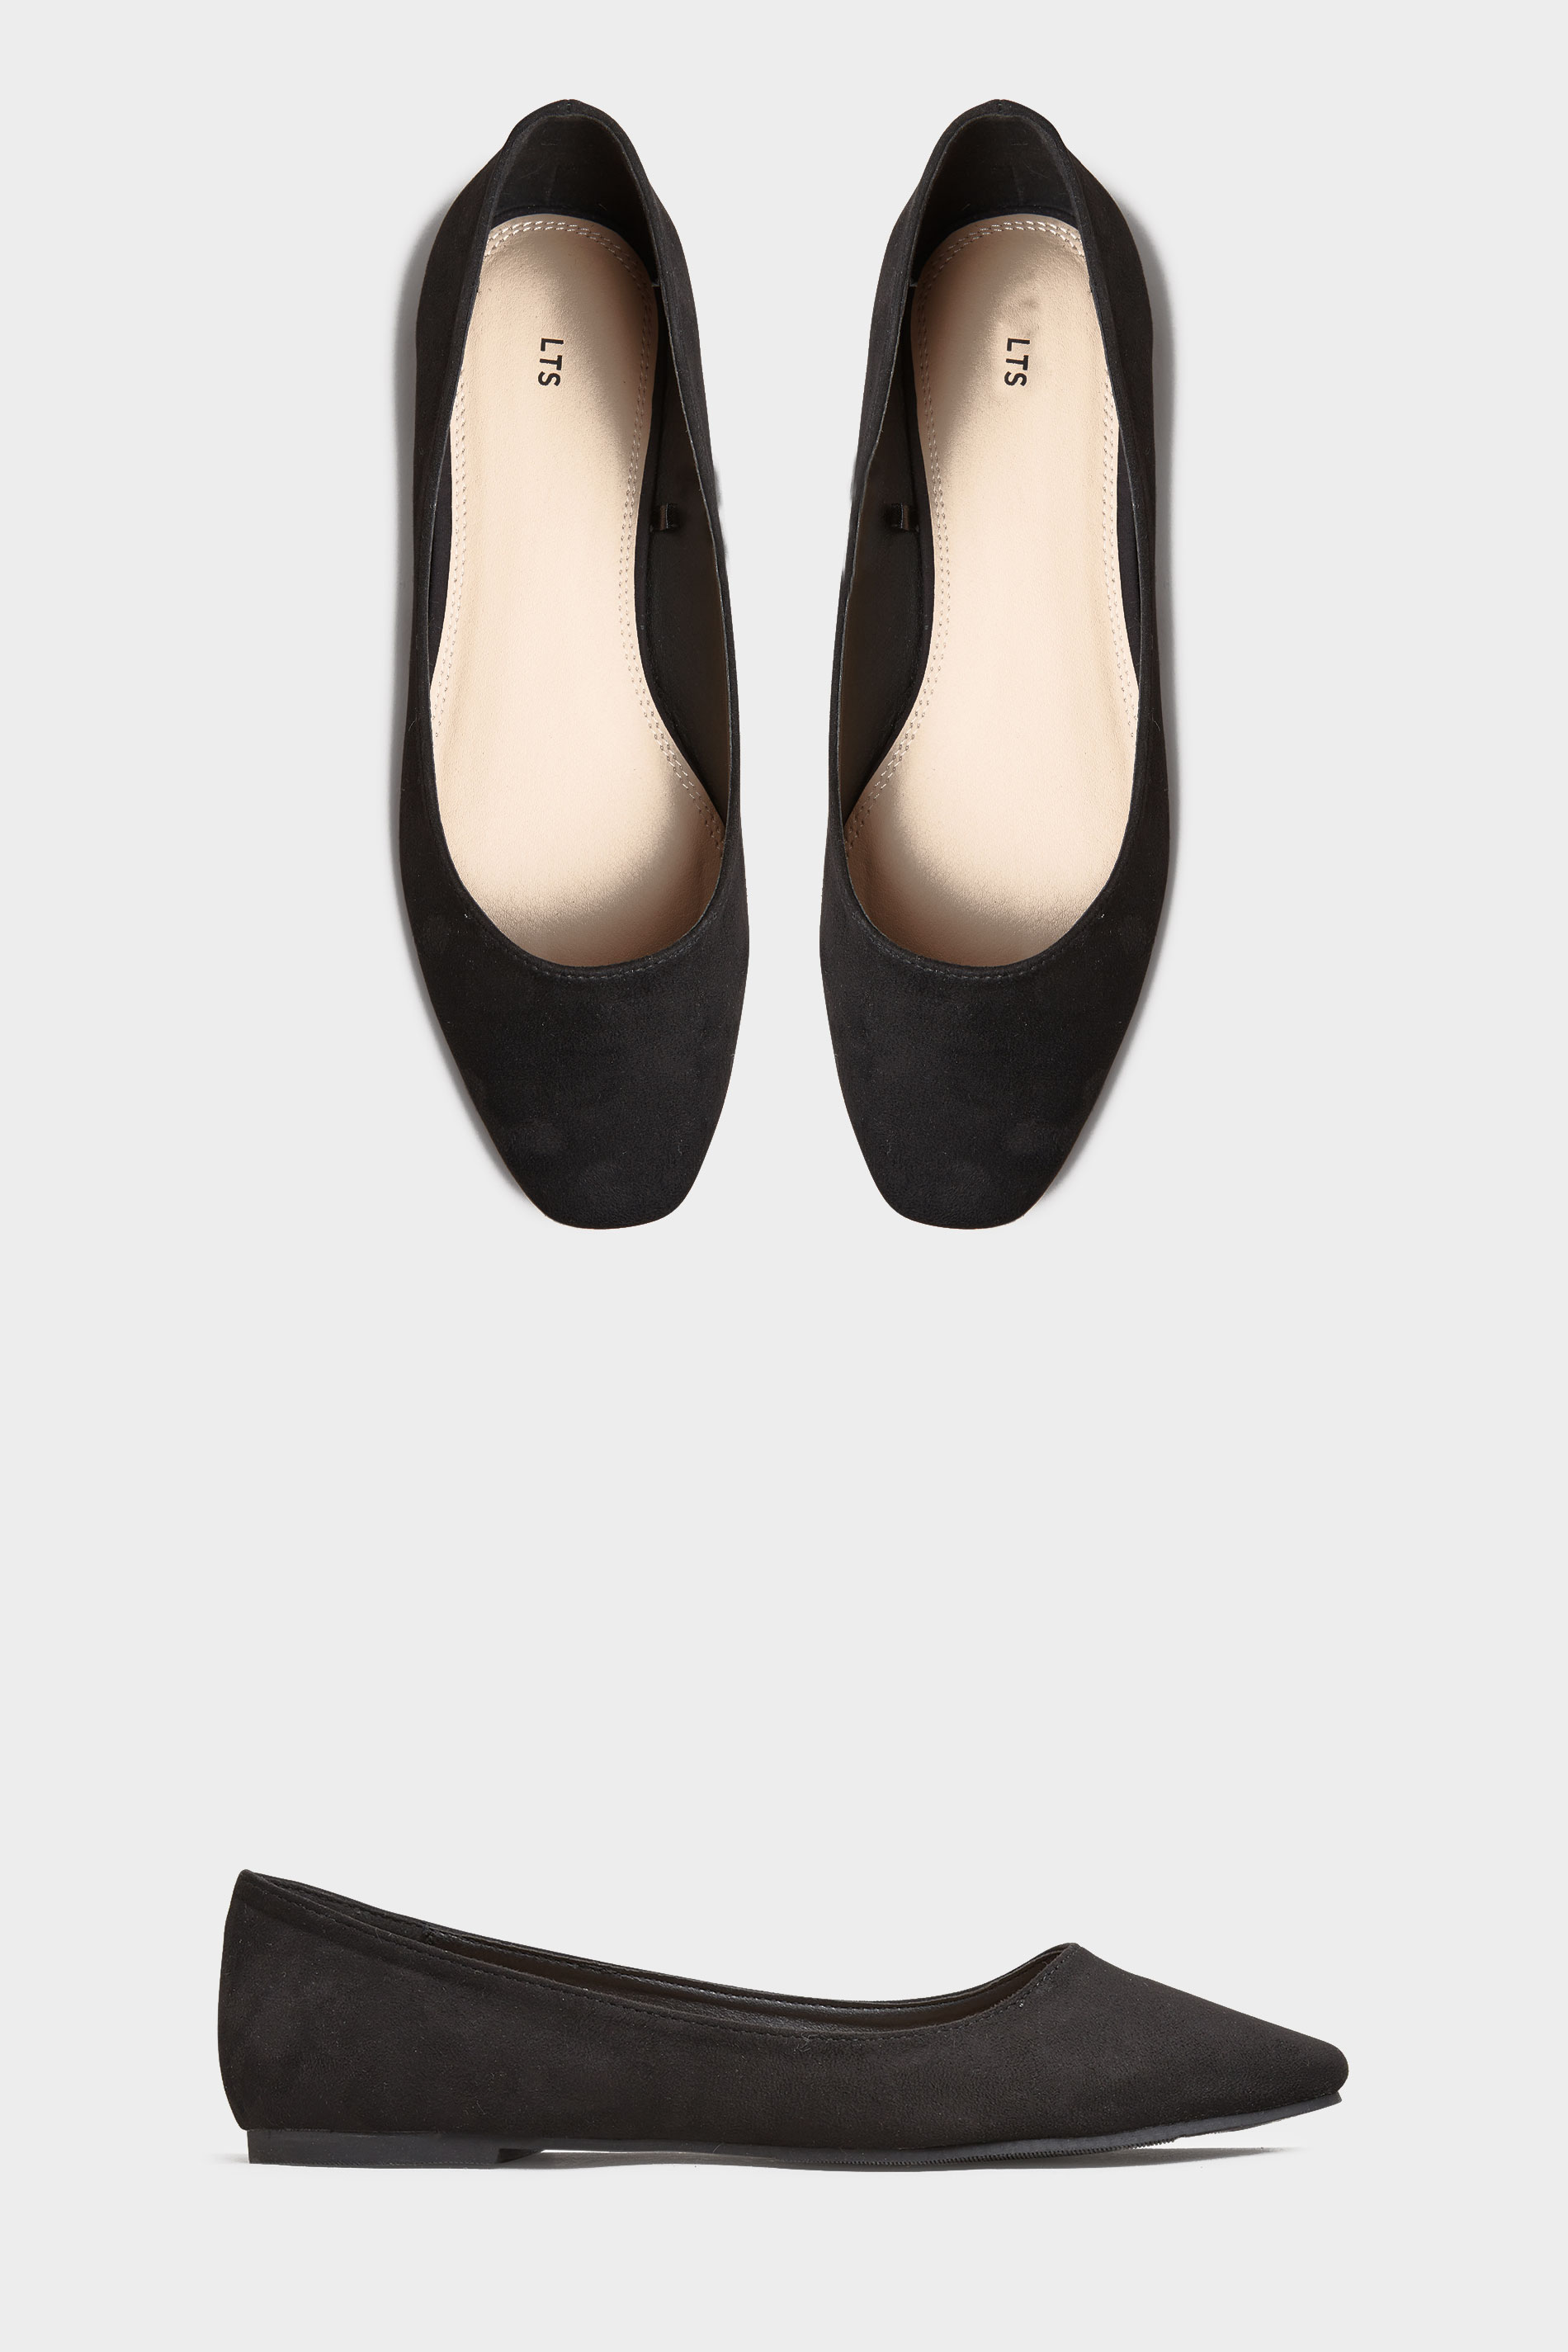 LTS Black Square Toe Ballet Pumps In Standard Fit | Long Tall Sally 2